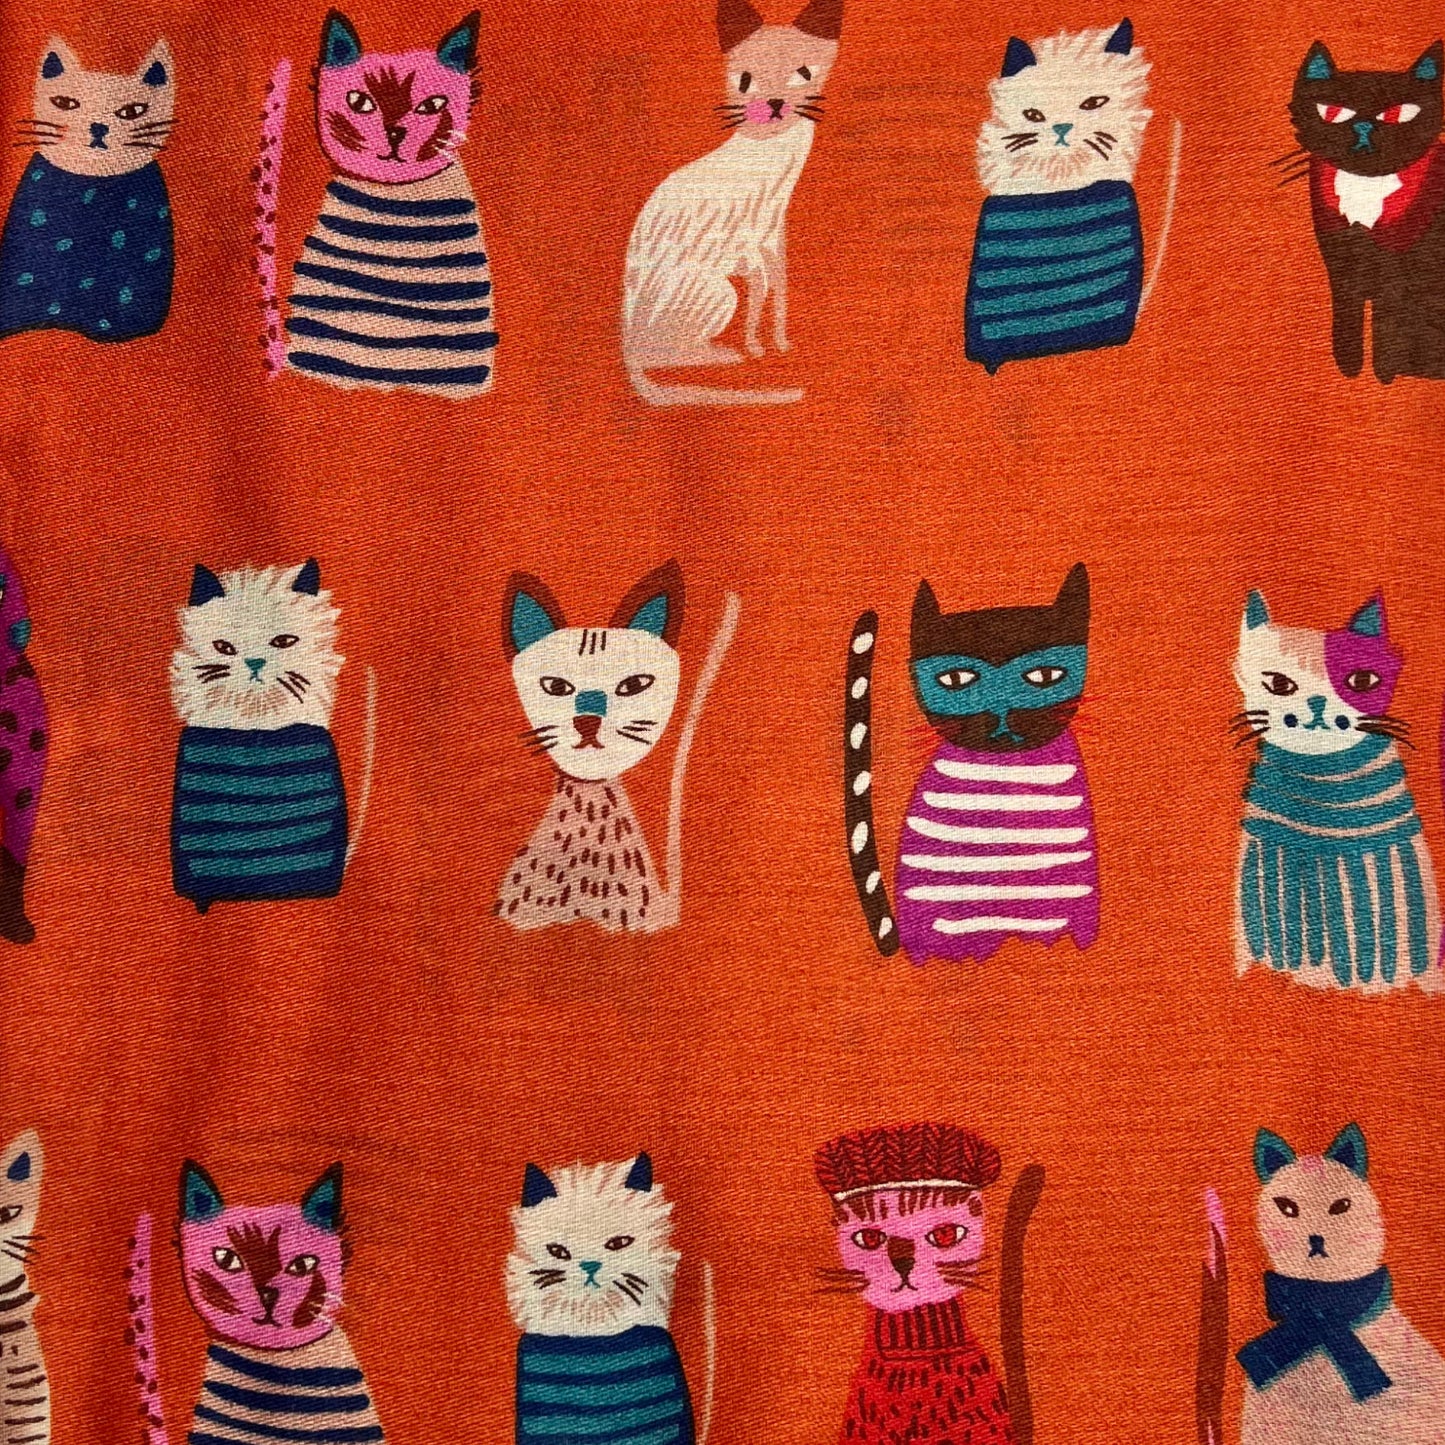 This Cat Costumes Print Scarf is the perfect way to add an element of fun and whimsy to any look. Crafted with a cotton blend, fringed at each end, and featuring an adorable print of cats wearing costumes, this scarf will make a great statement piece.